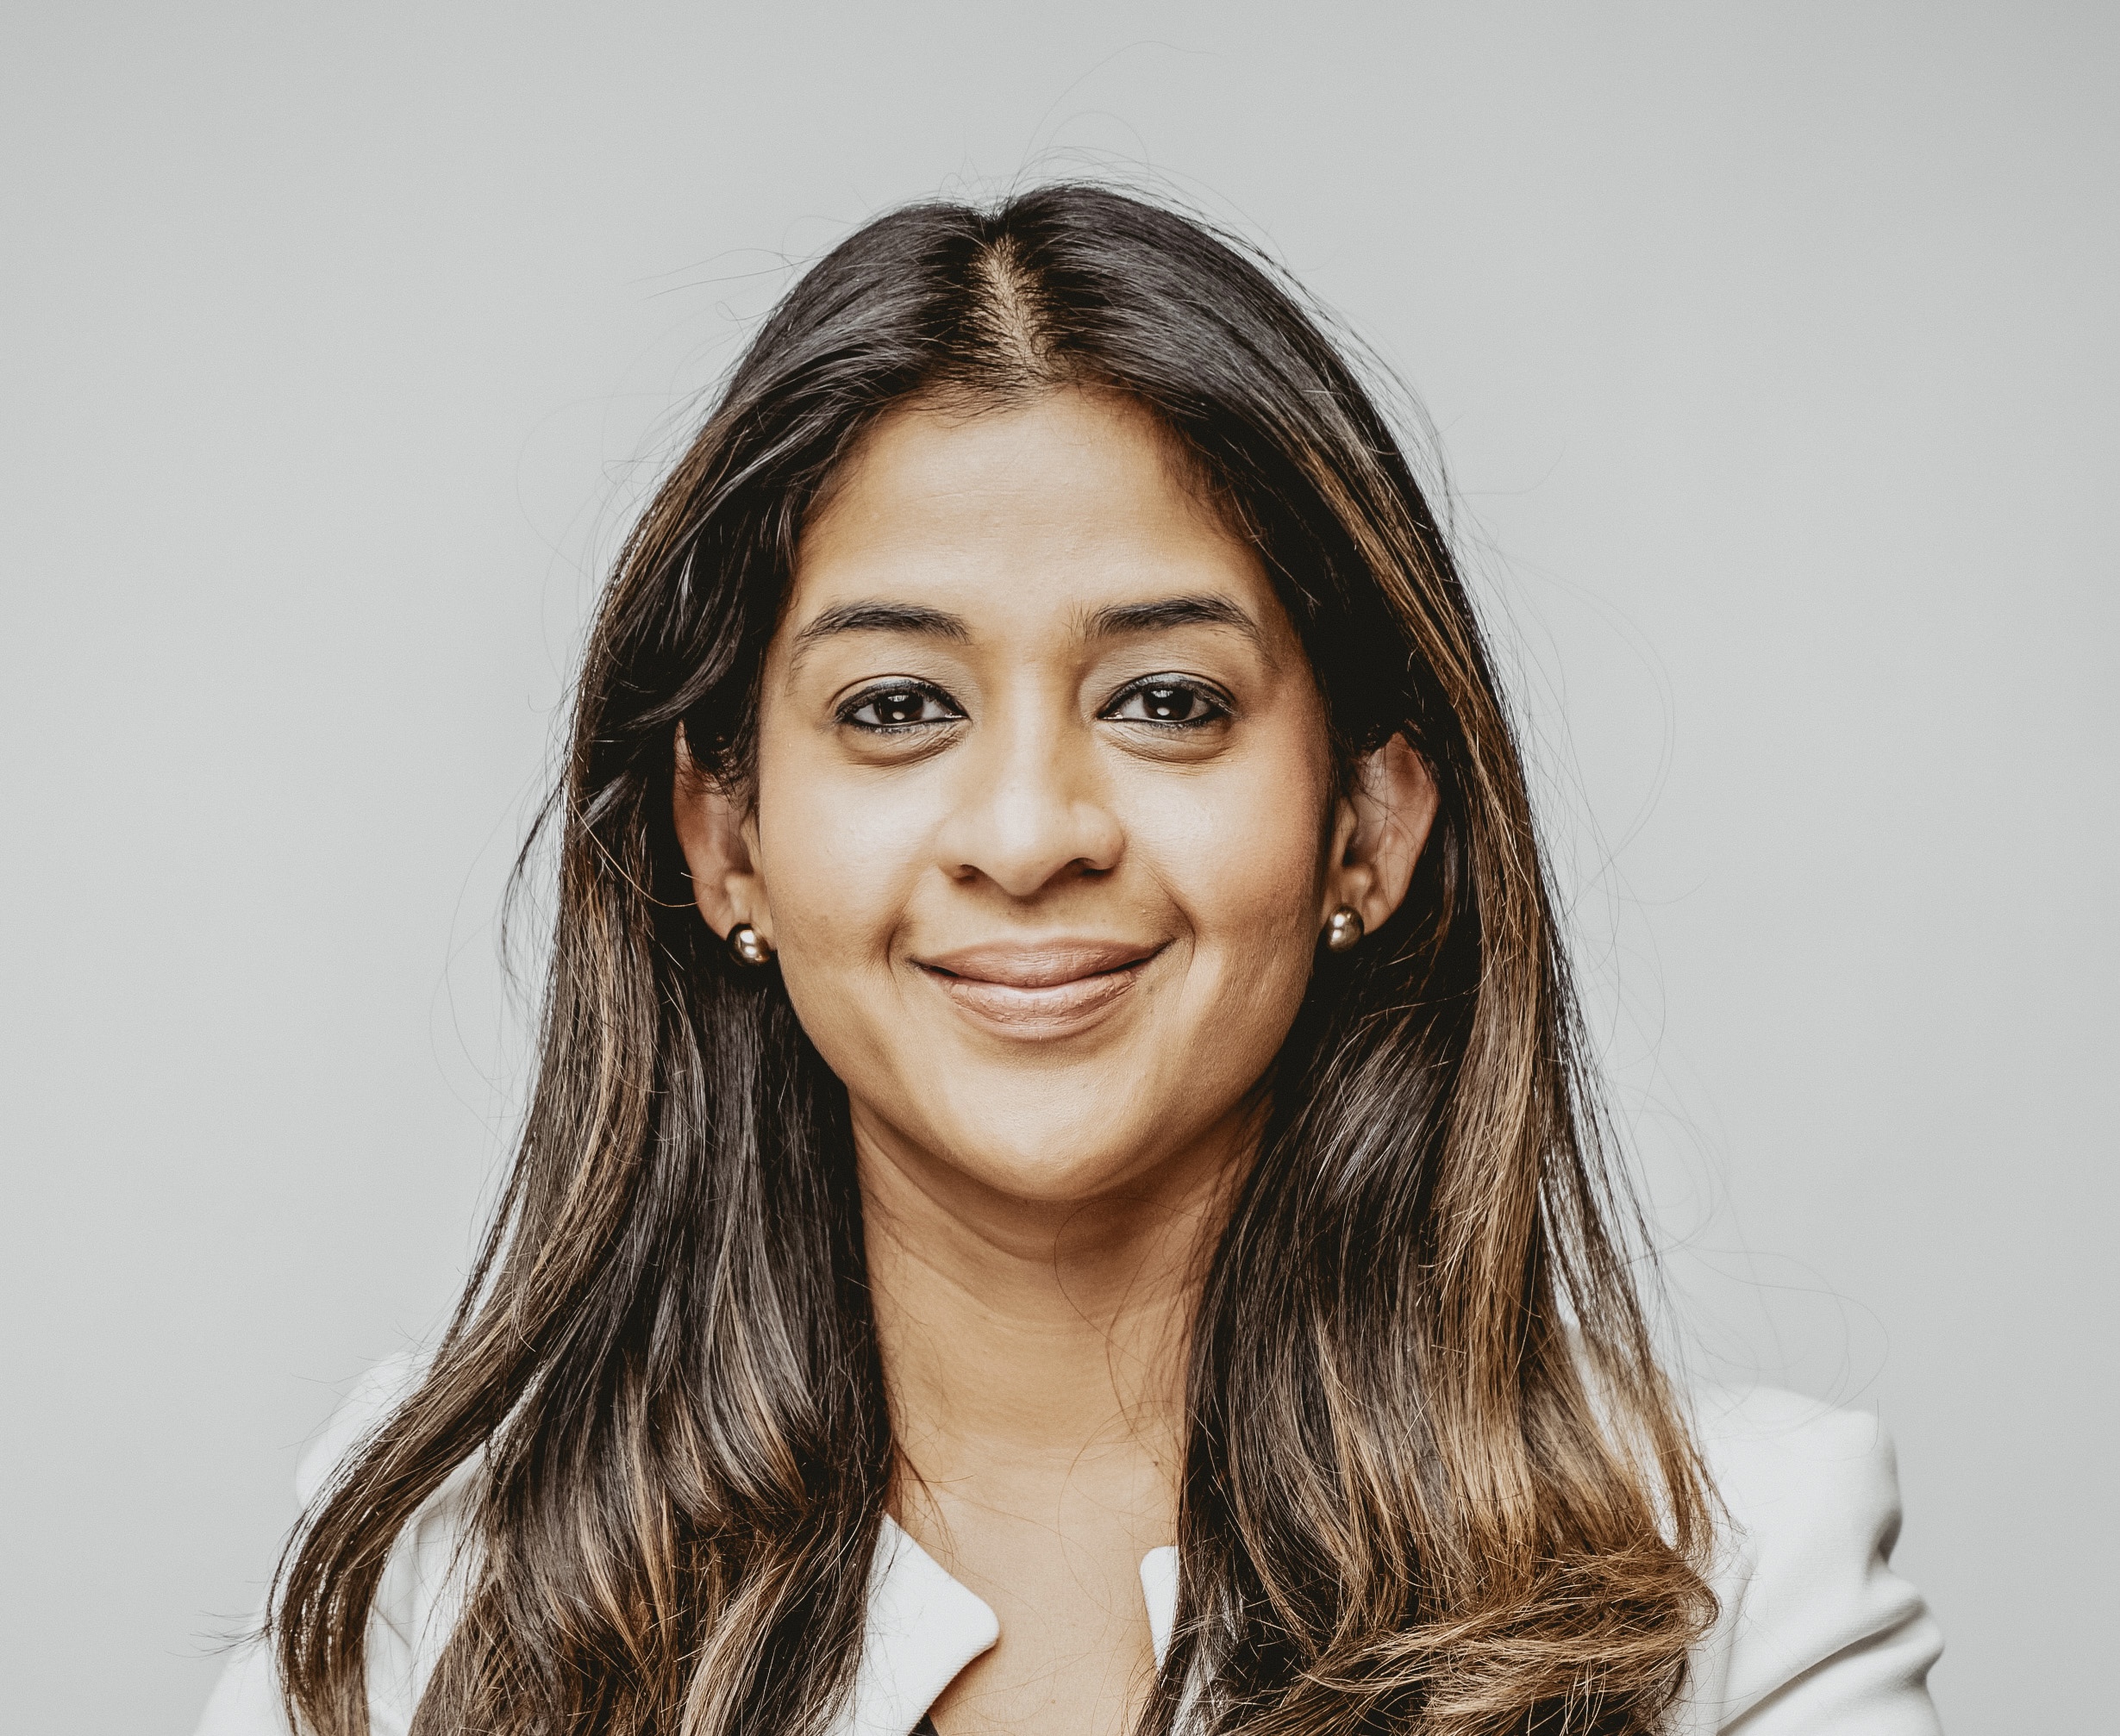 Trulioo – 7 Questions with Shradha Mittal, SVP of People & Culture